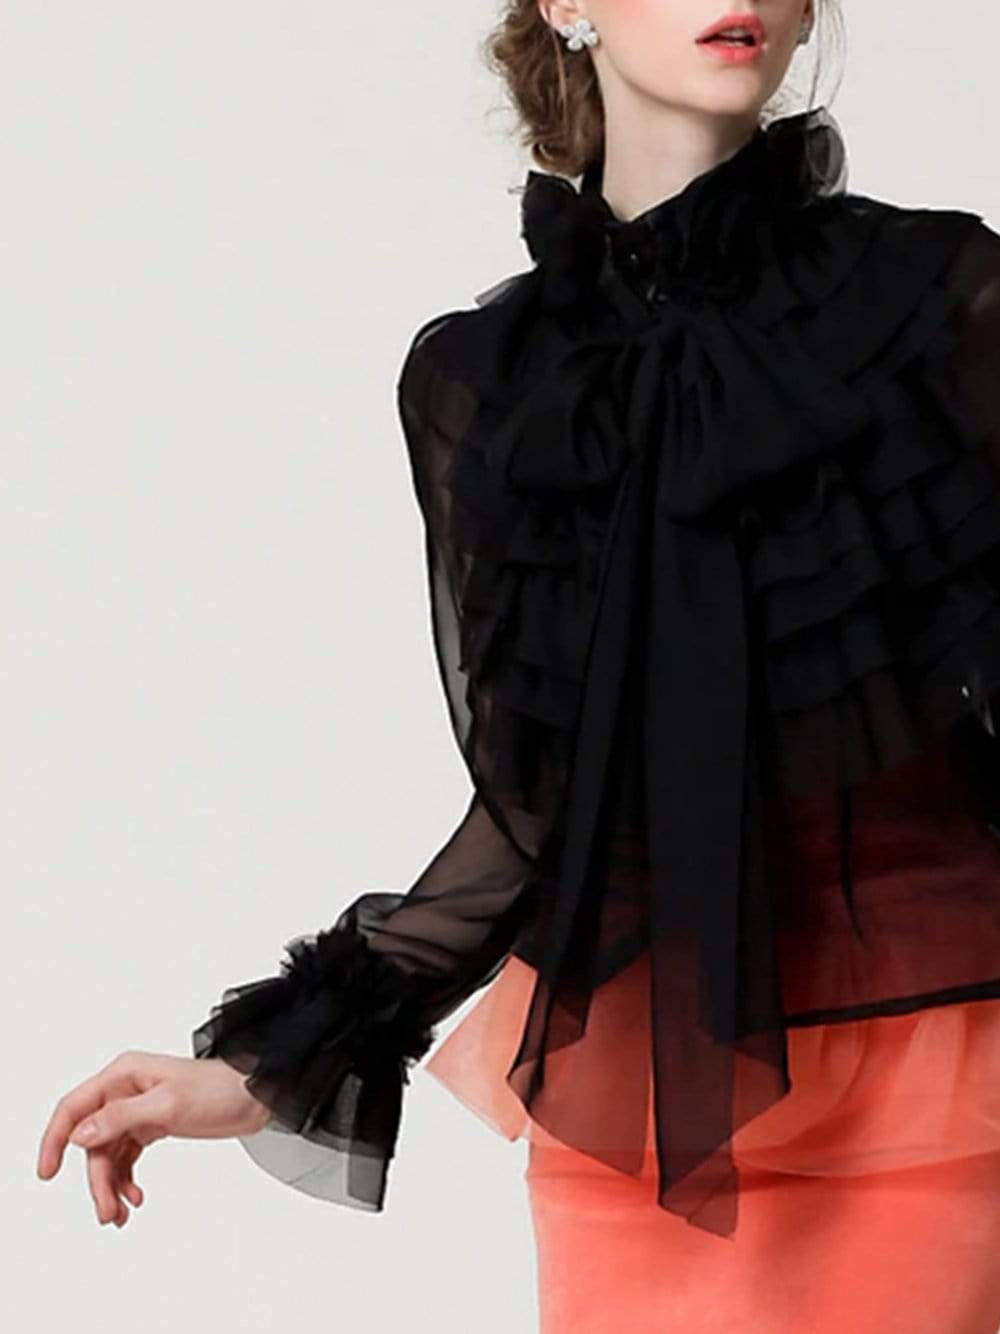 CORAL Bowknot Ruffle Blouse in Black